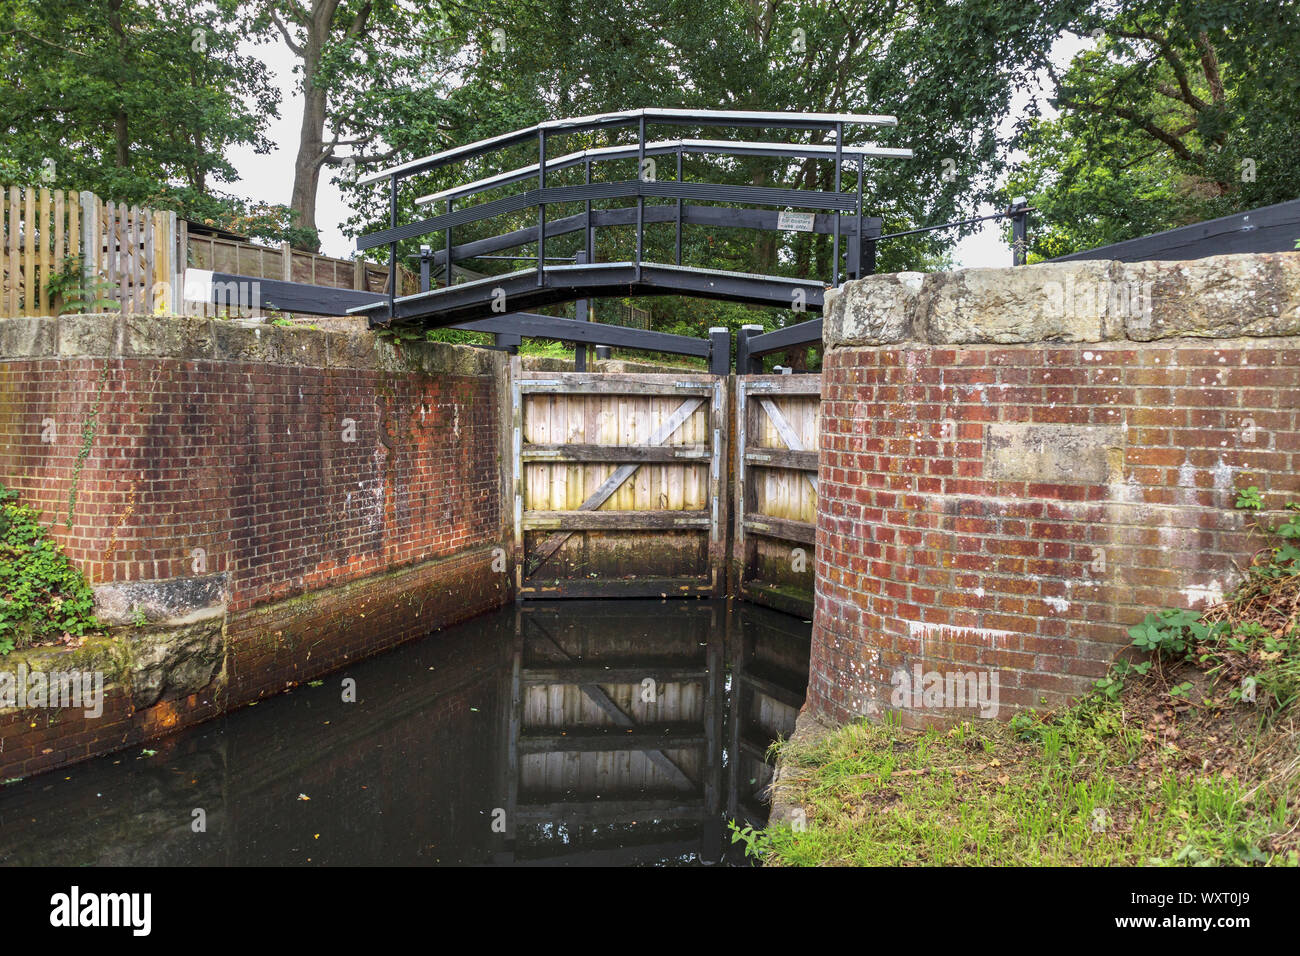 Typical pound lock with brick walls and wooden gates on the Basingstoke Canal and towpath, Knaphill, Woking, Surrey, southeast England, UK Stock Photo